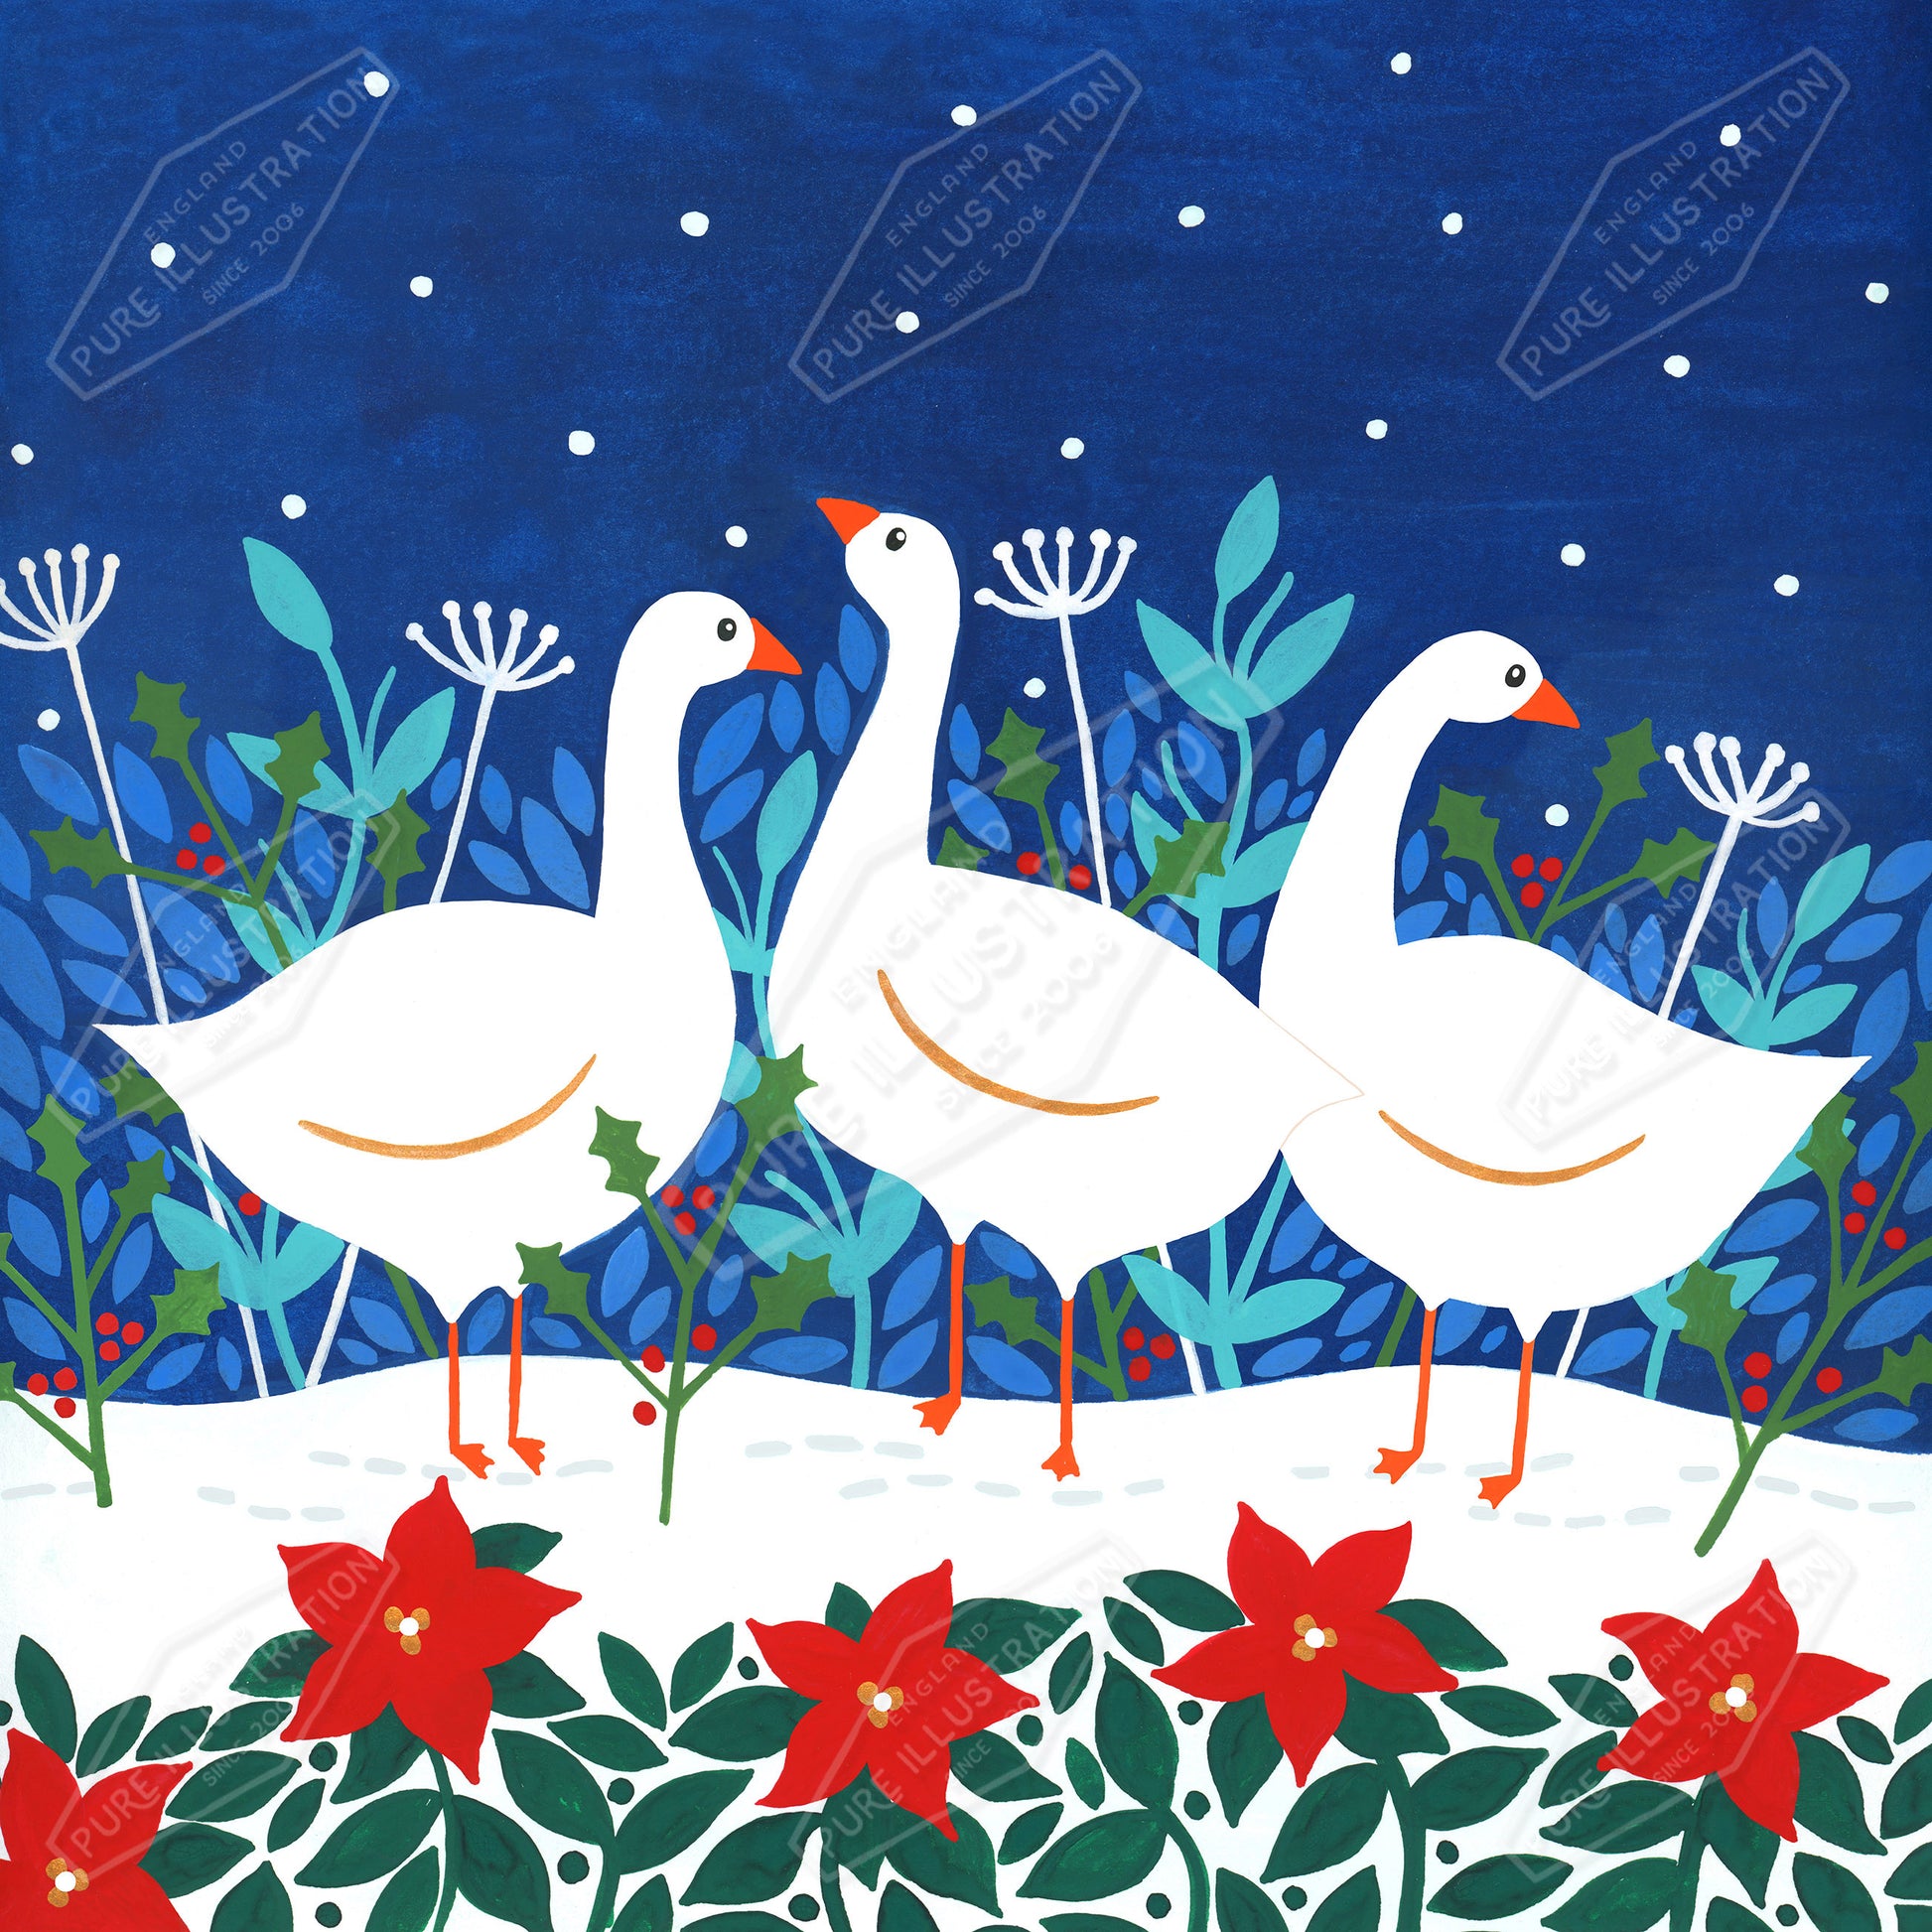 00035679SSN- Sian Summerhayes is represented by Pure Art Licensing Agency - Christmas Greeting Card Design